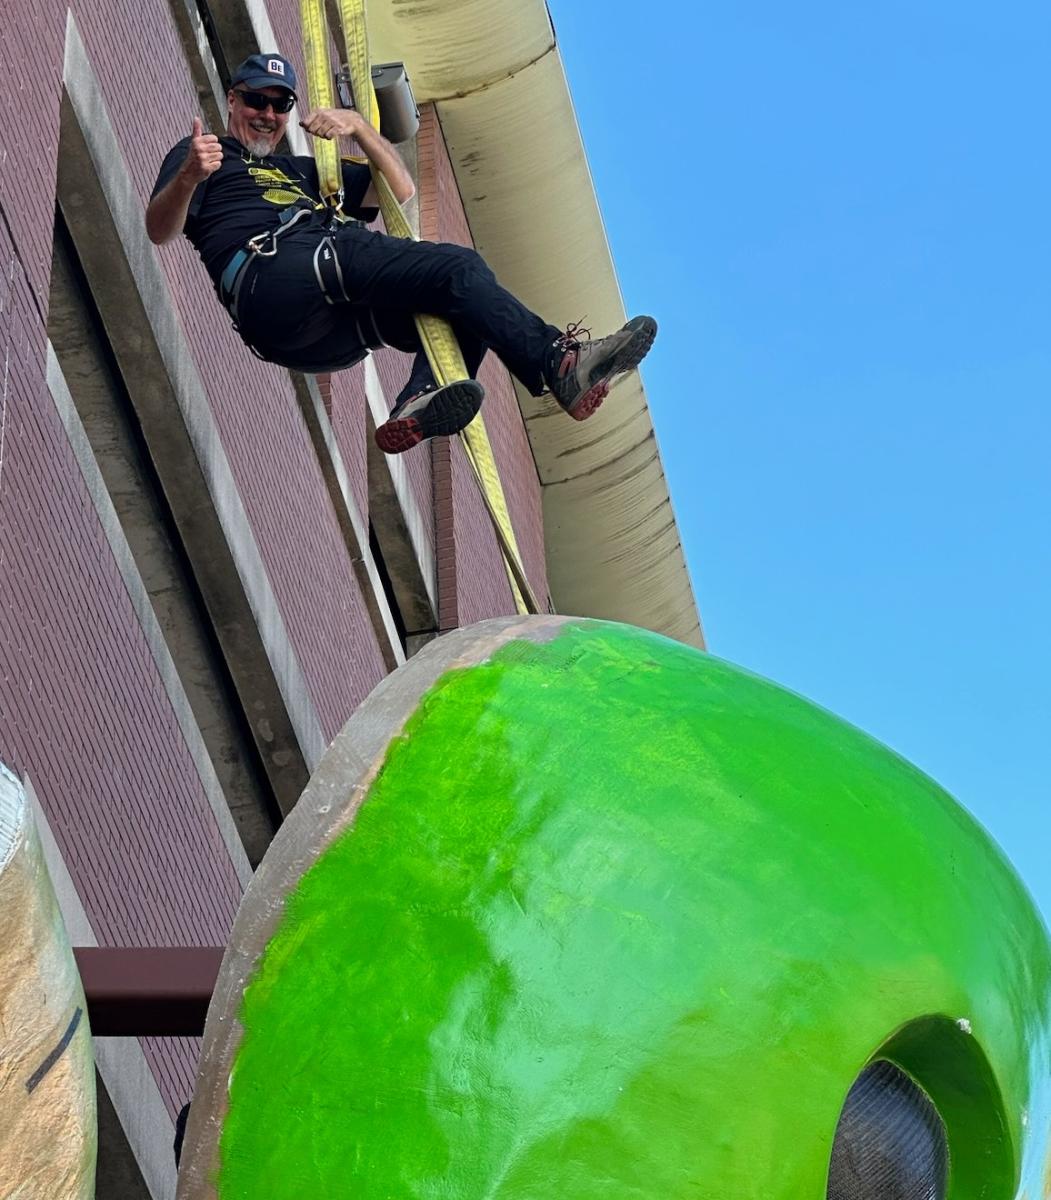 Artist Marc Phelps hanging above the green head of his sculpture Clive the Alien